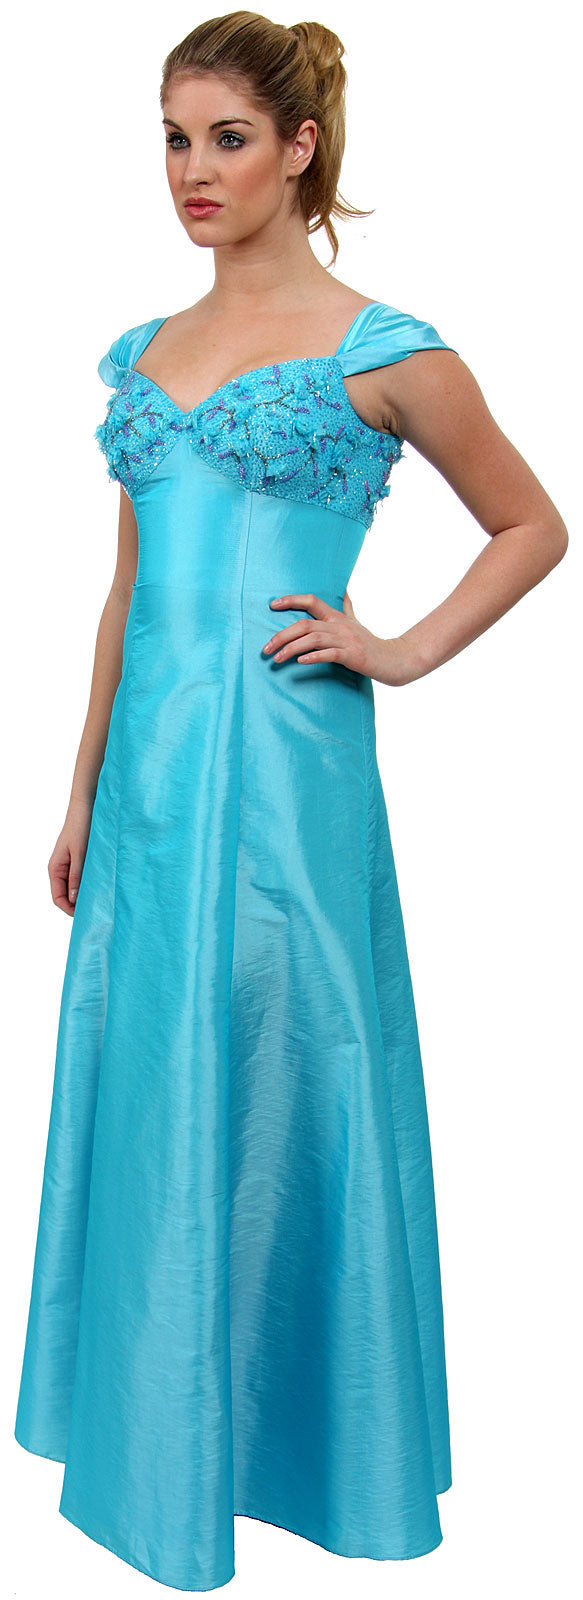 Main image of A Line Cap-sleeved Beaded Prom Dress